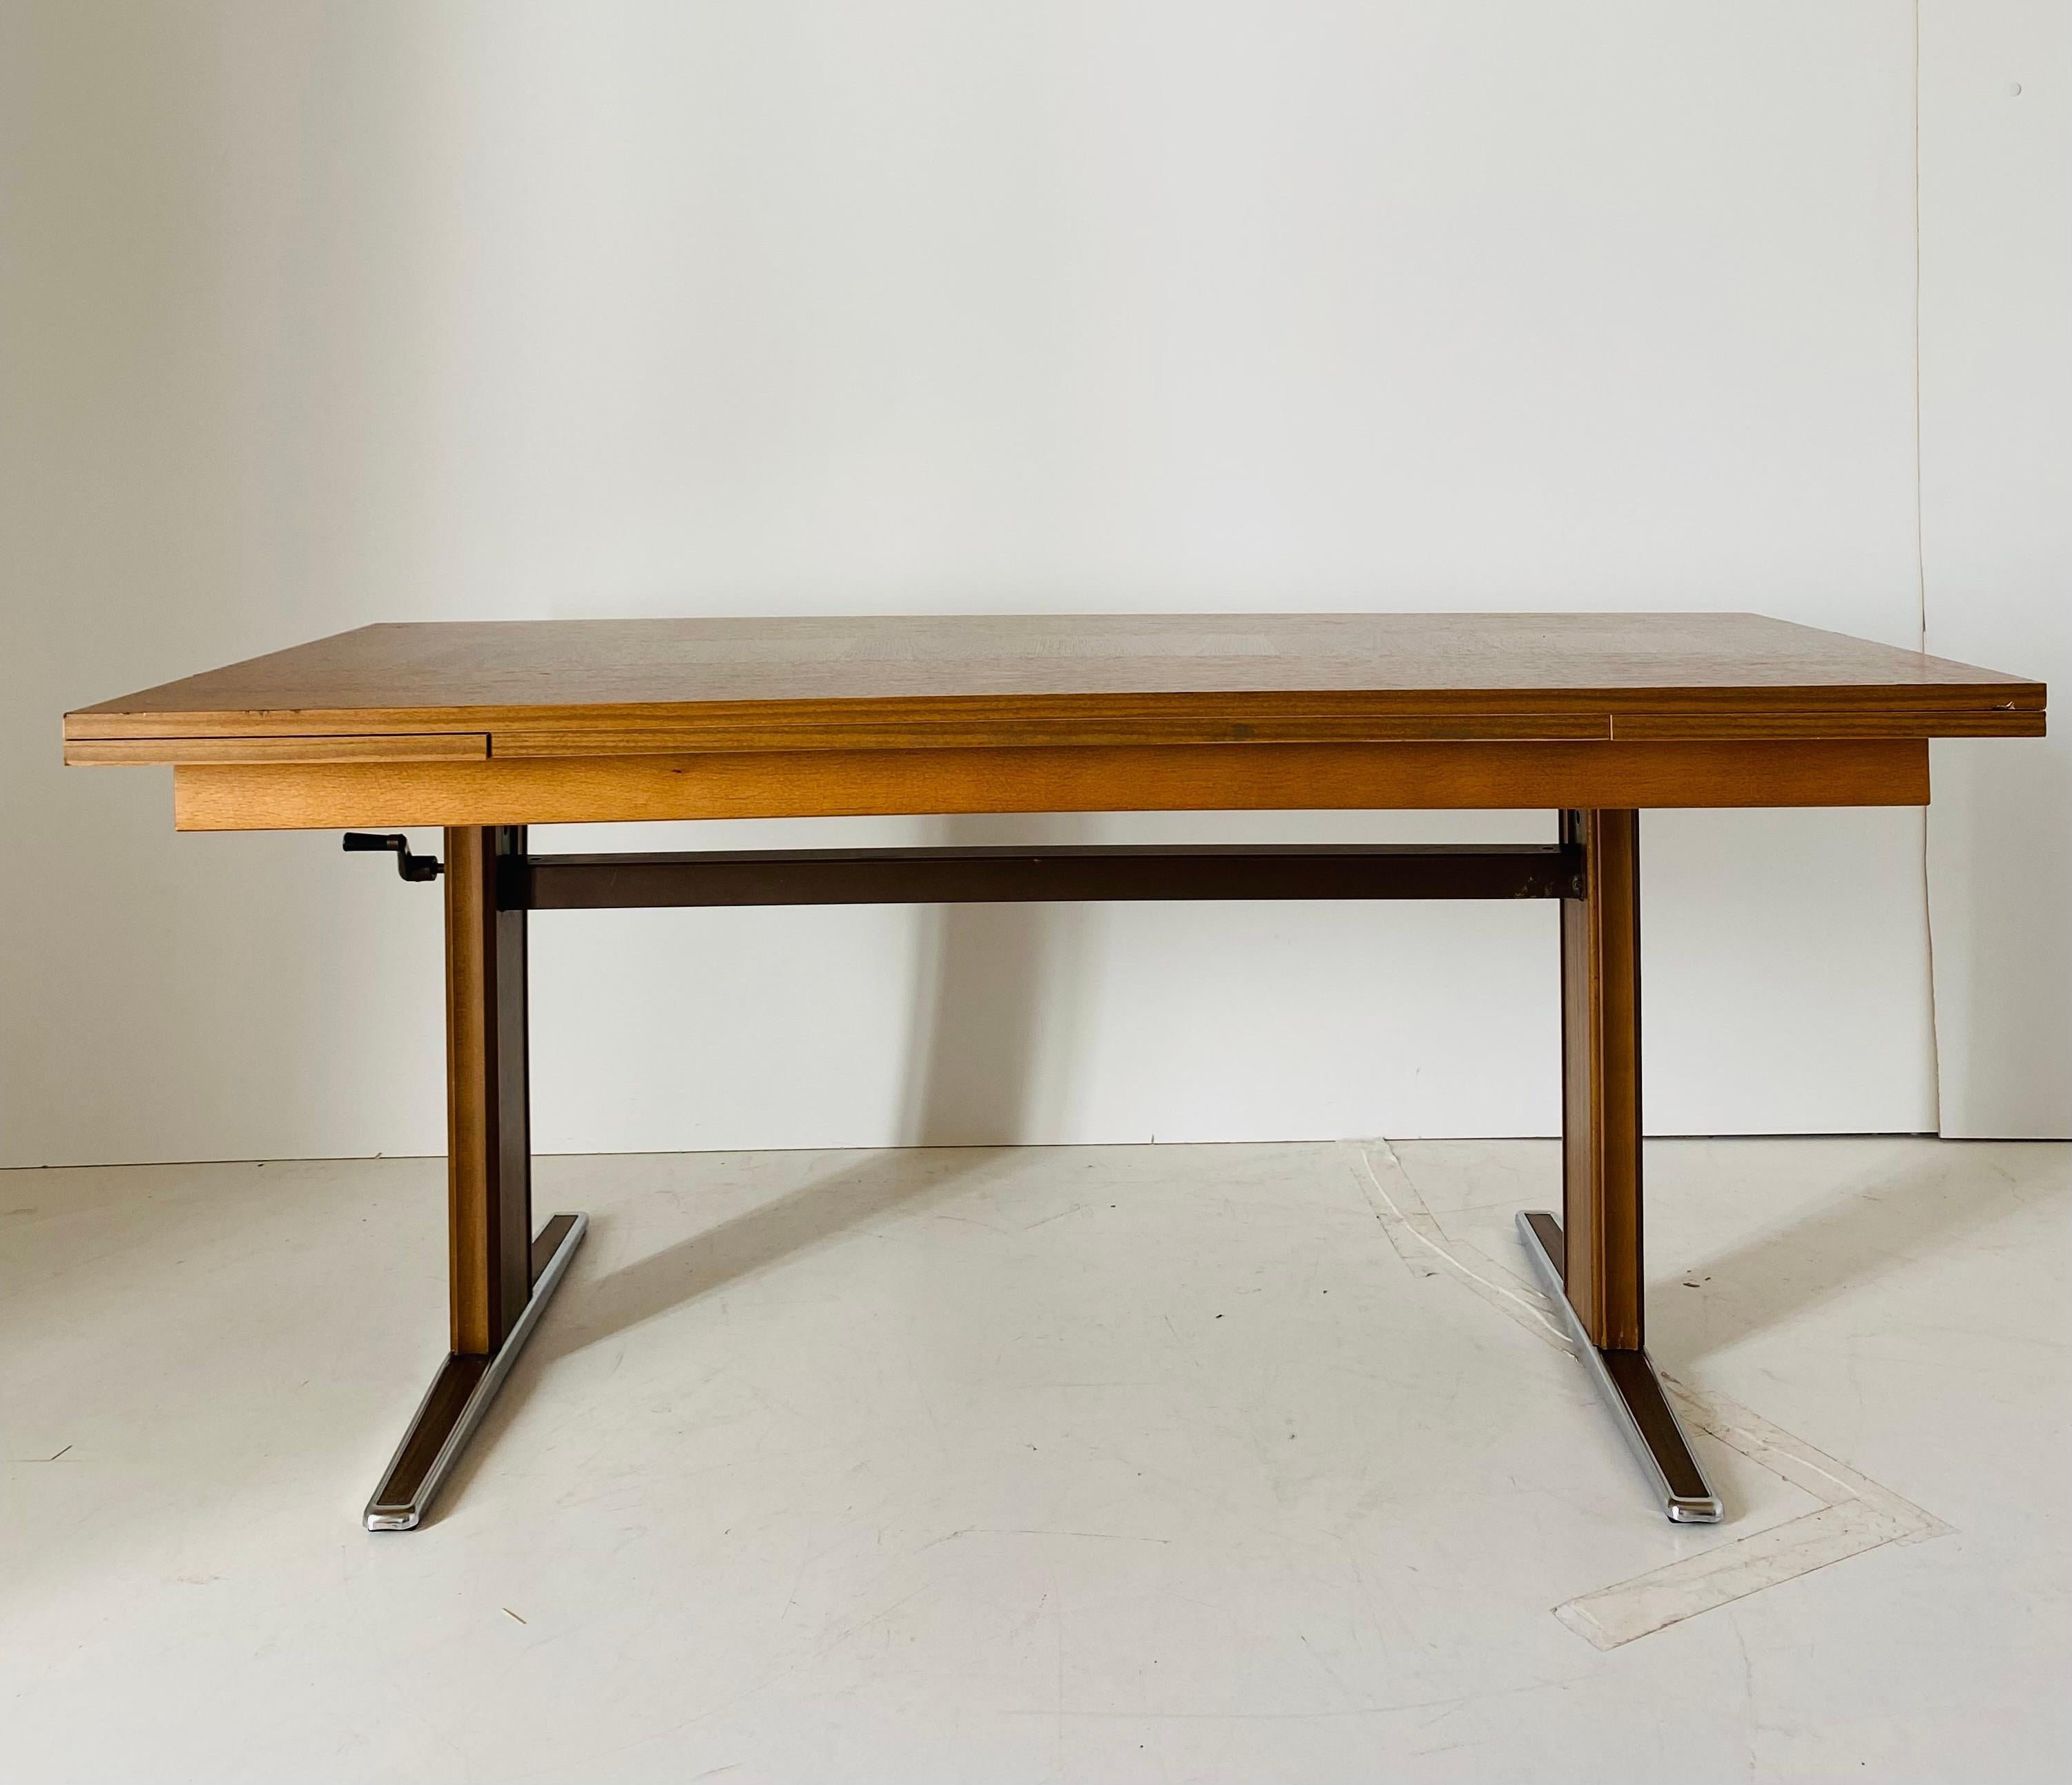 Vintage extendible coffee table, Italy 1970s.

A rare extendible rectangular coffee table with chromed feet. Italian mid-century style piece of vintage design. 
The table is made of a wood venereed top with chance both to extend it on the sides